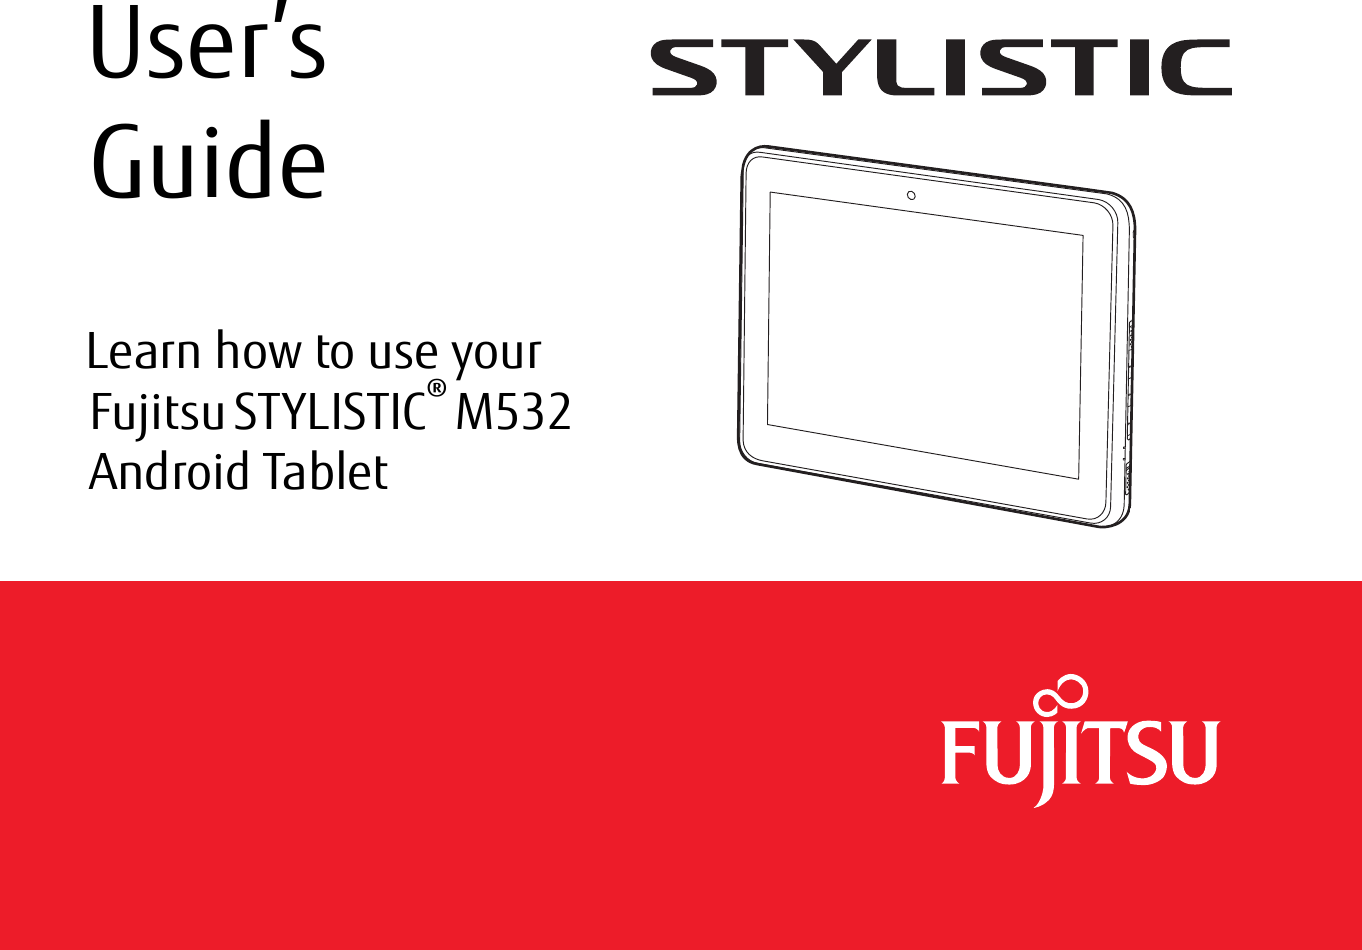  User’s GuideLearn how to use your Fujitsu STYLISTIC® M532 Android Tablet